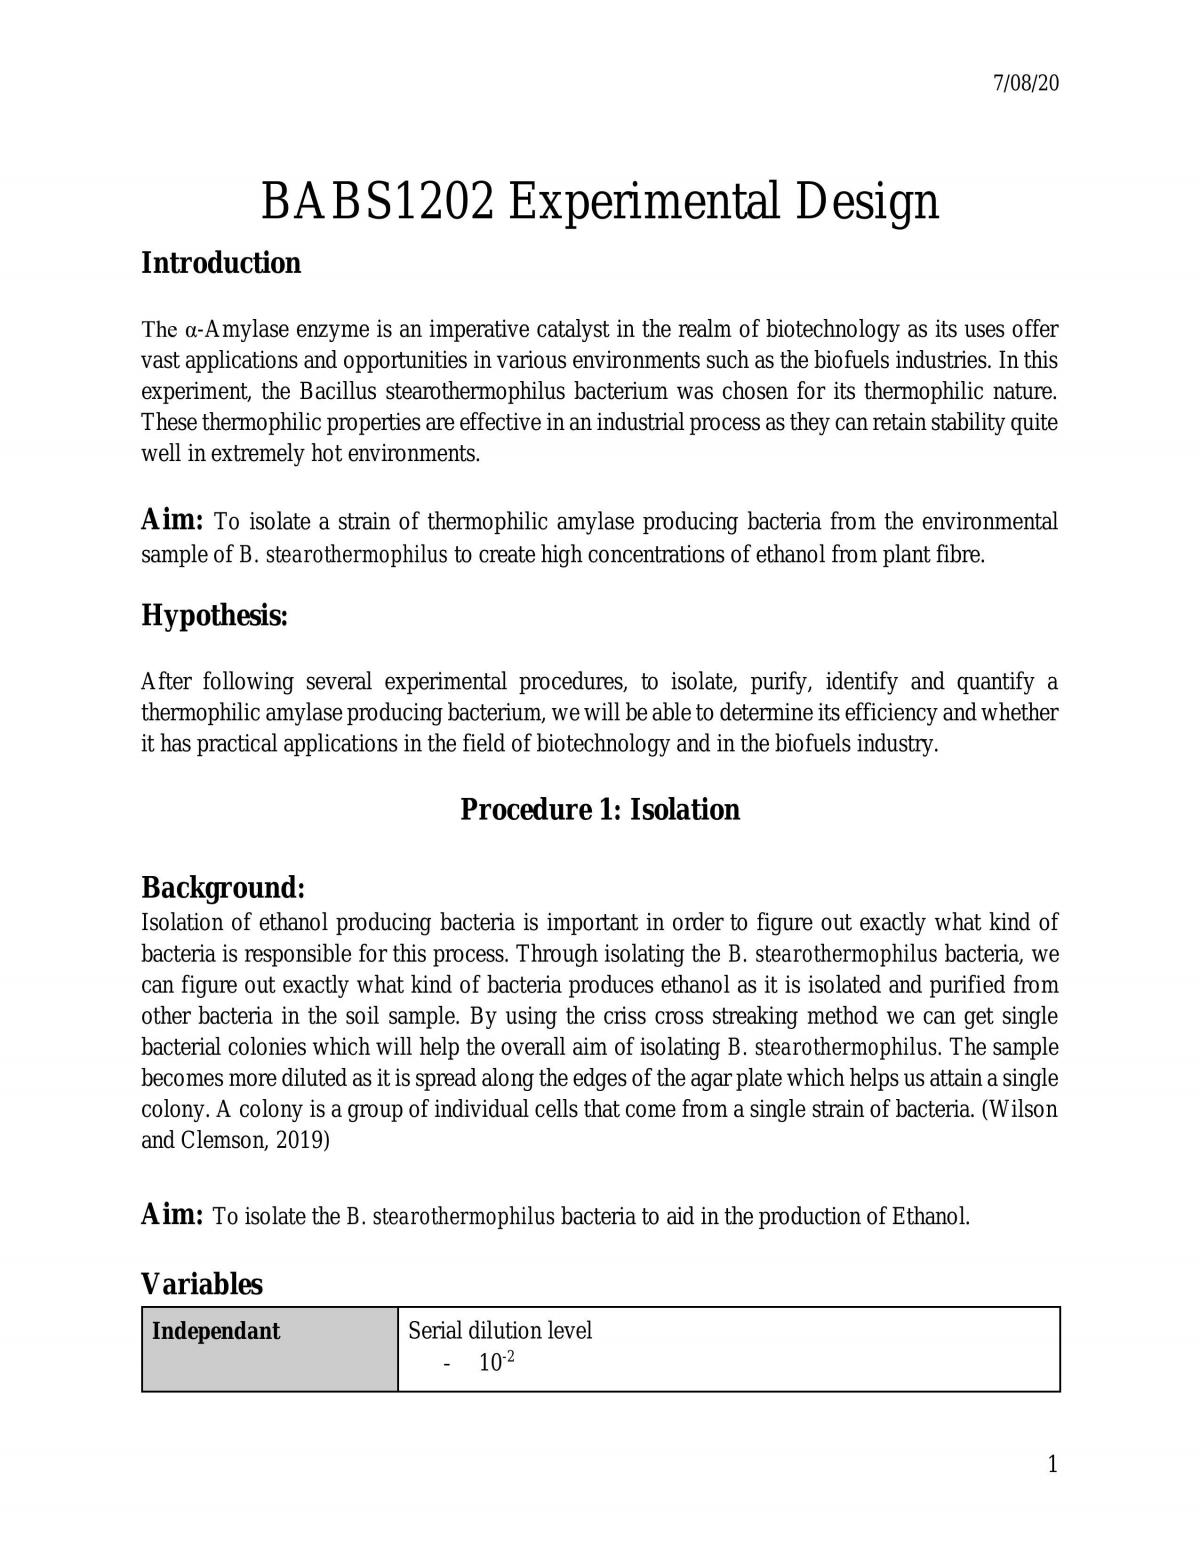 Experimental Design - Page 1